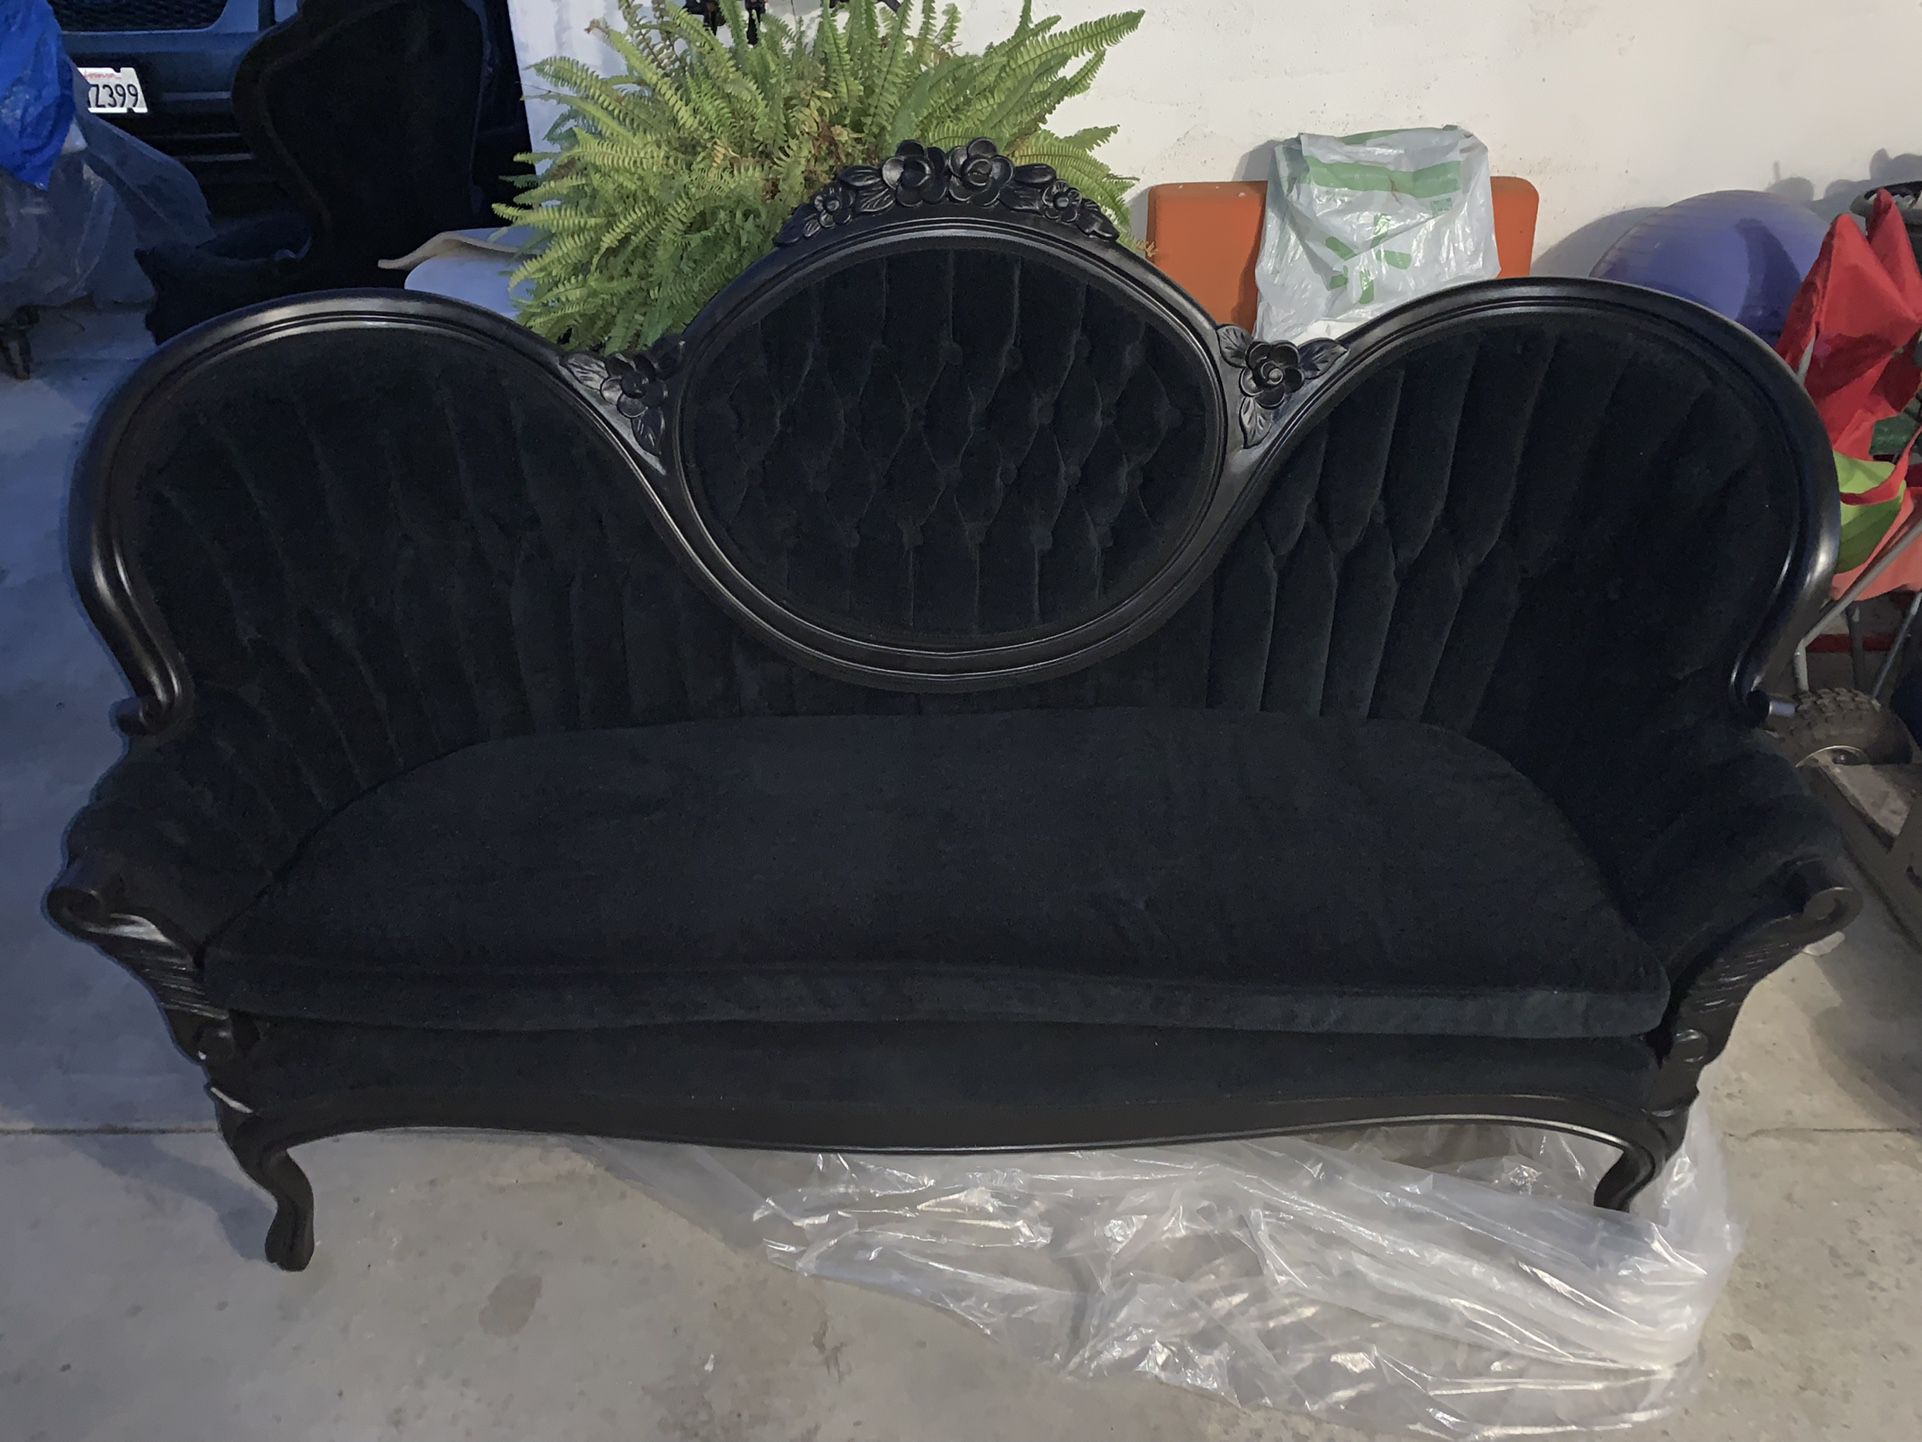 Black Victorian Gothic Sofa for Sale in Downey, CA - OfferUp